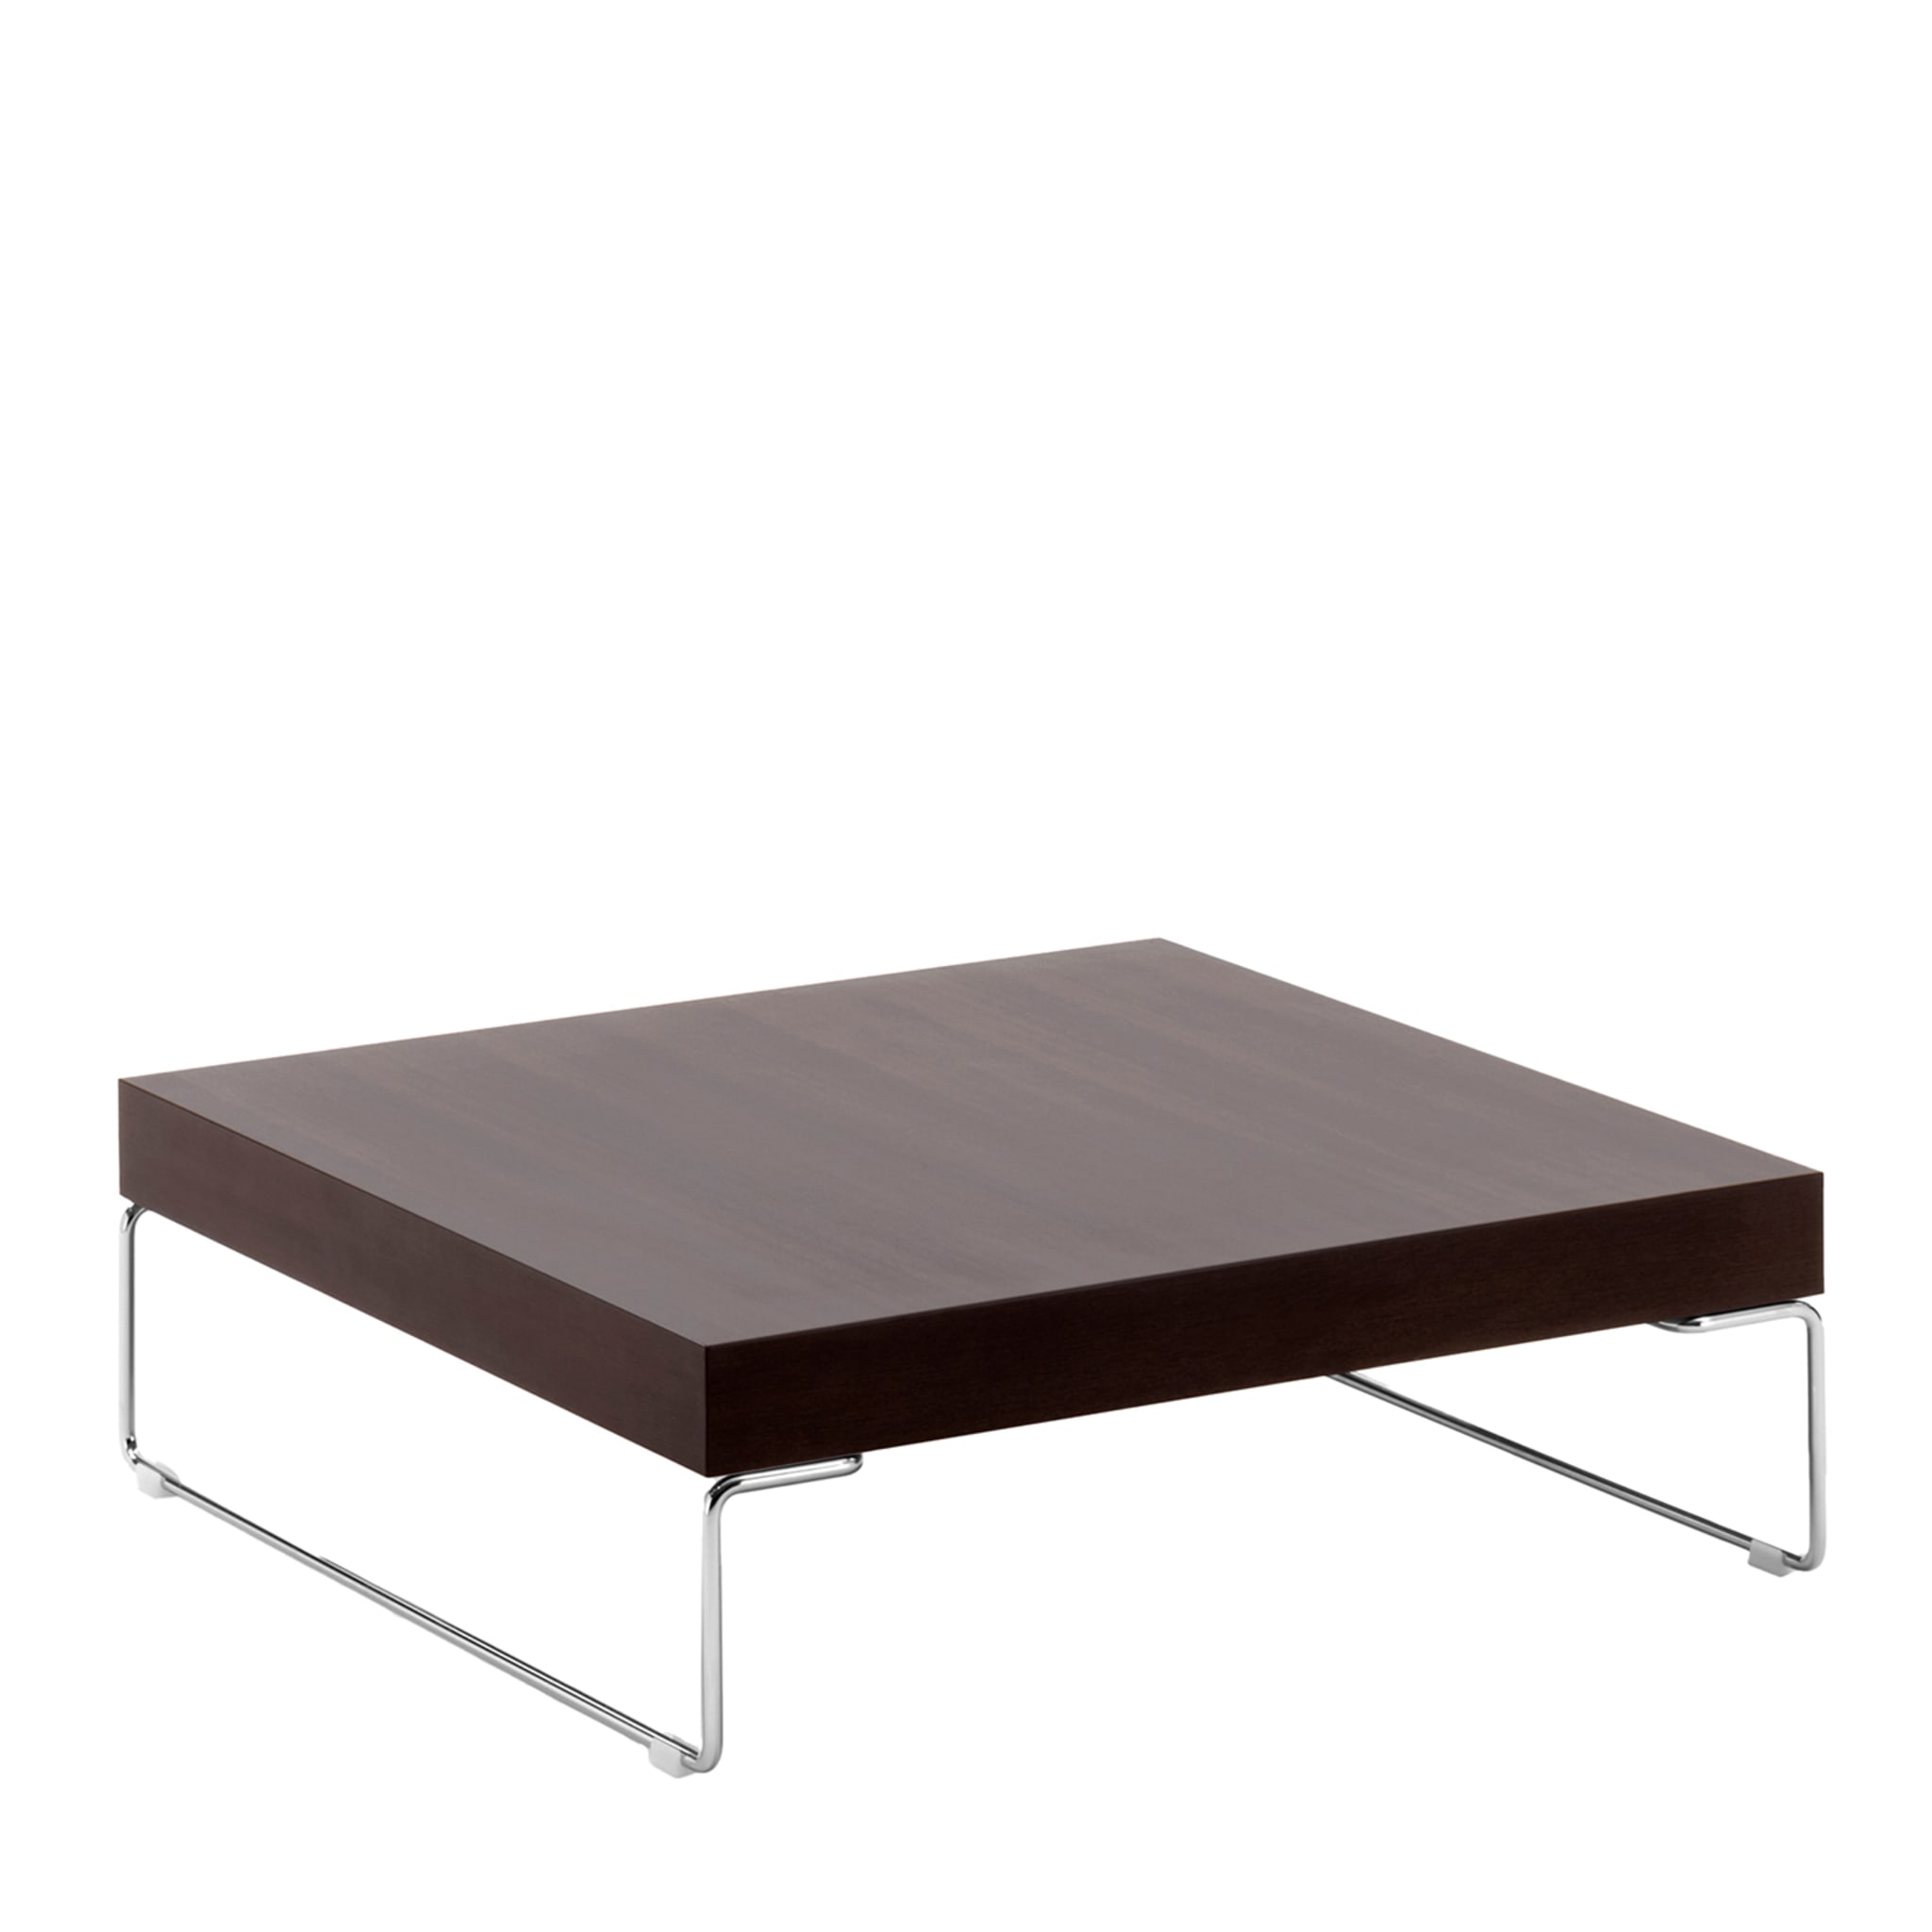 CUBIKO coffee table - Main view